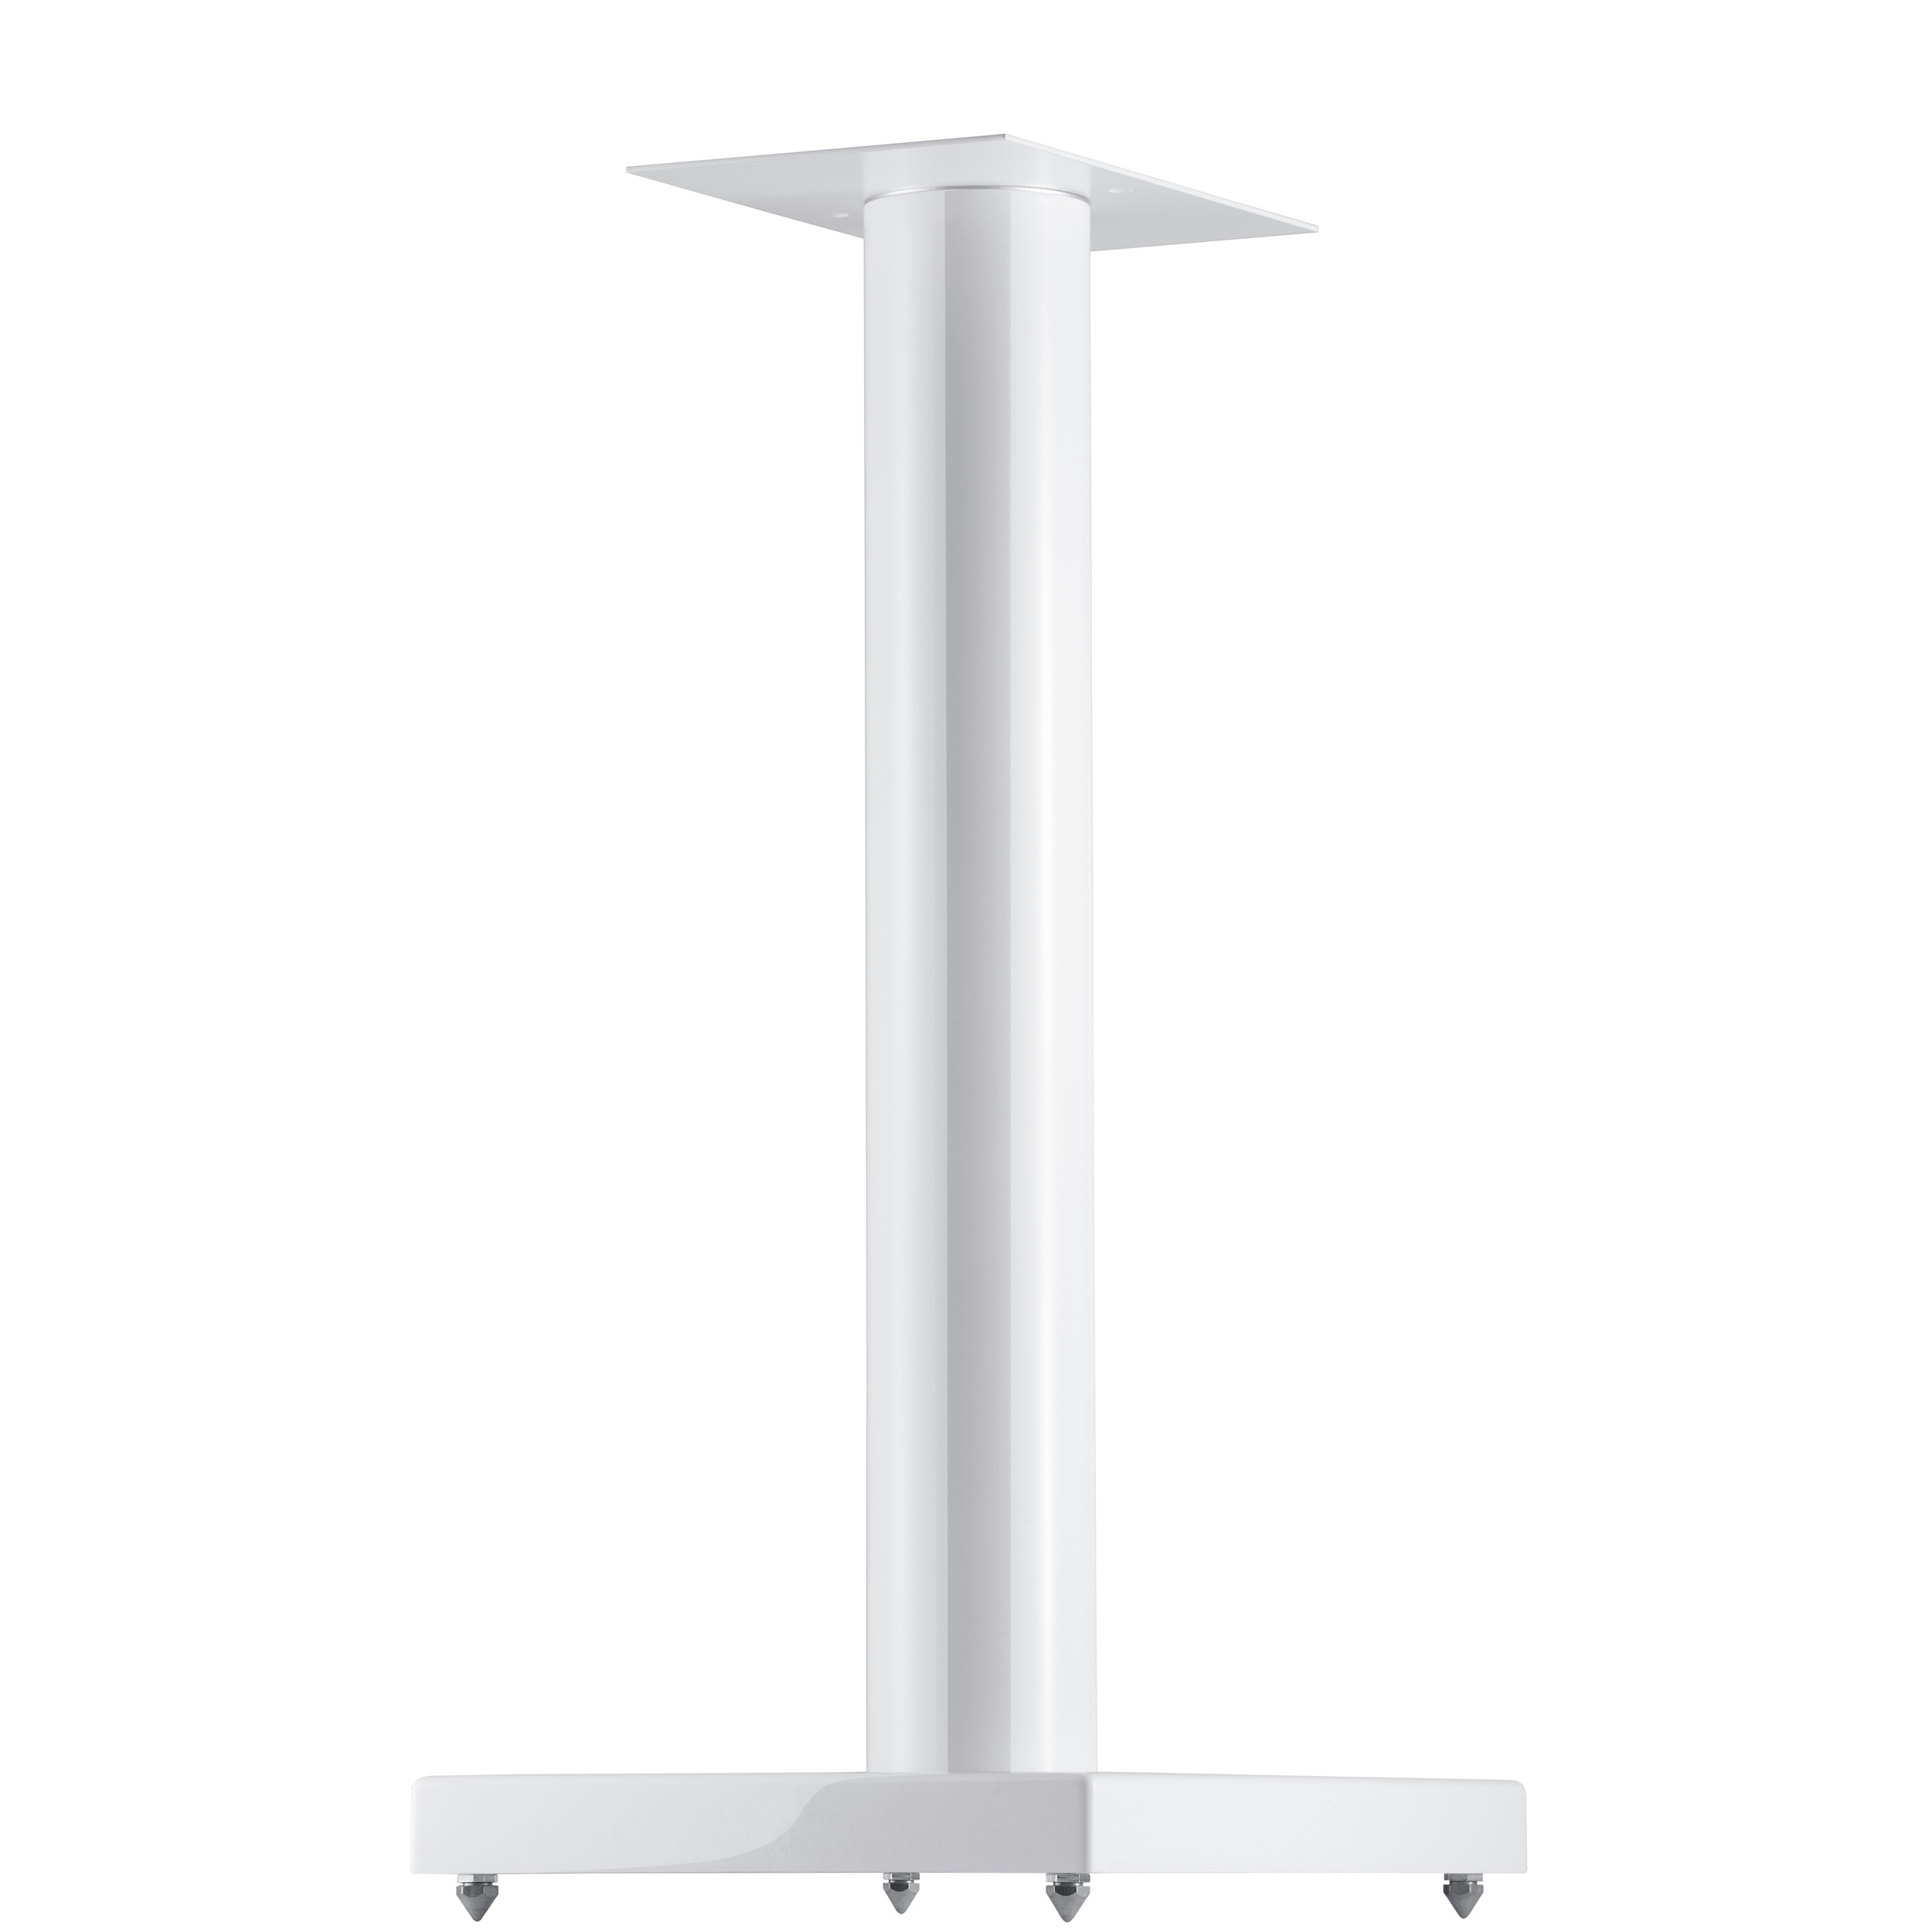 LS660, LS stand, white/silver (2pc)